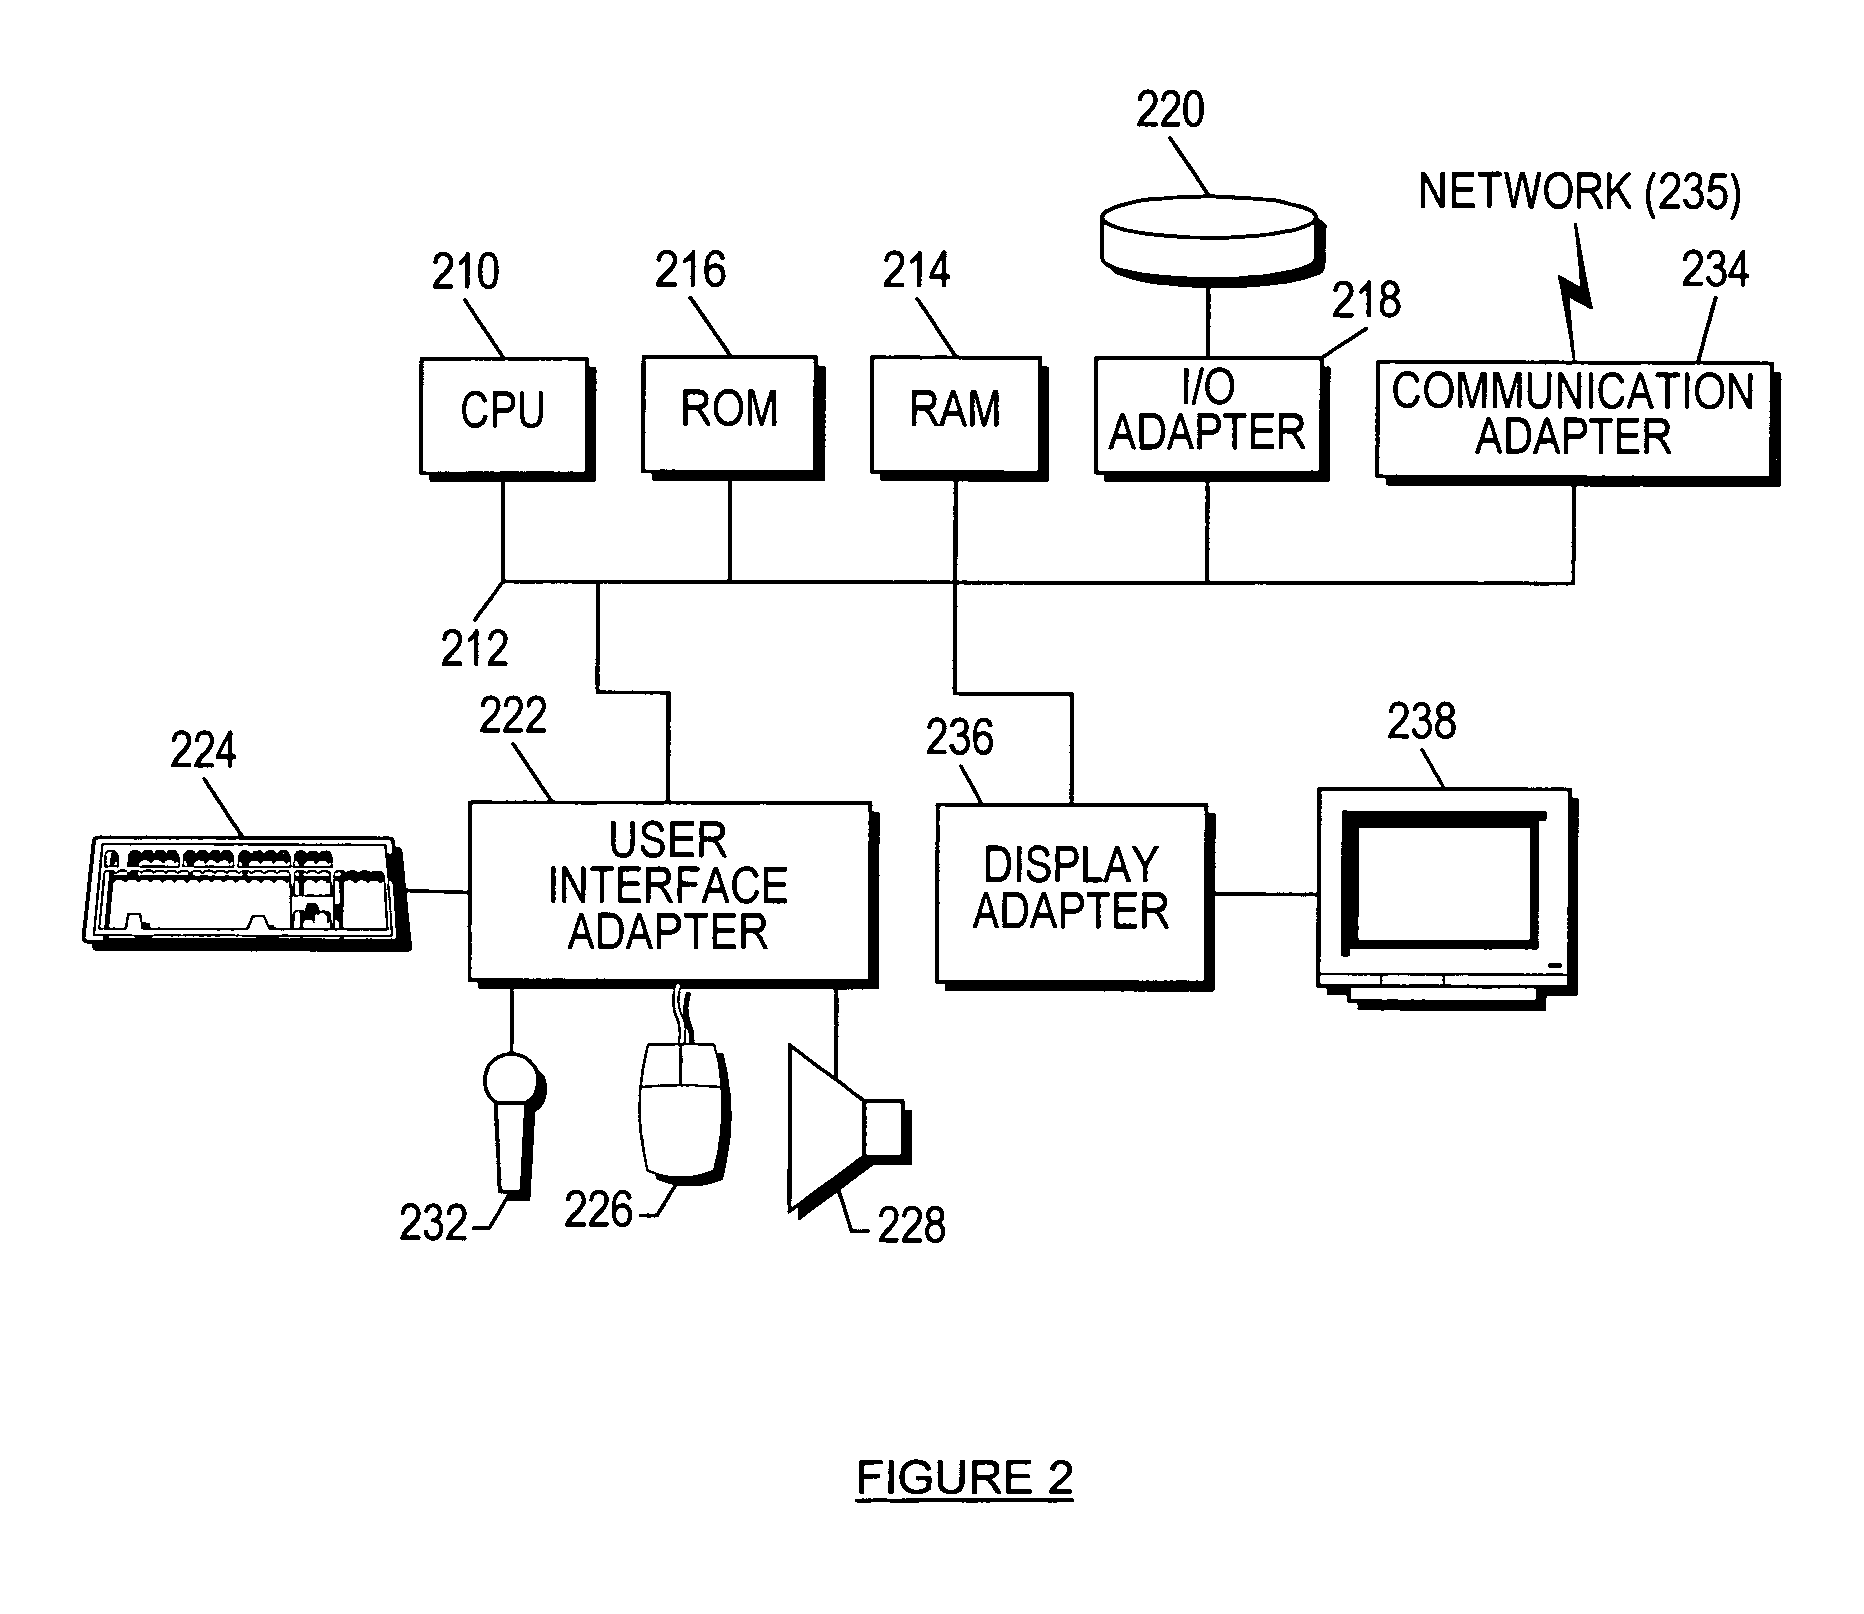 System, method and computer program product for processing network accounting information